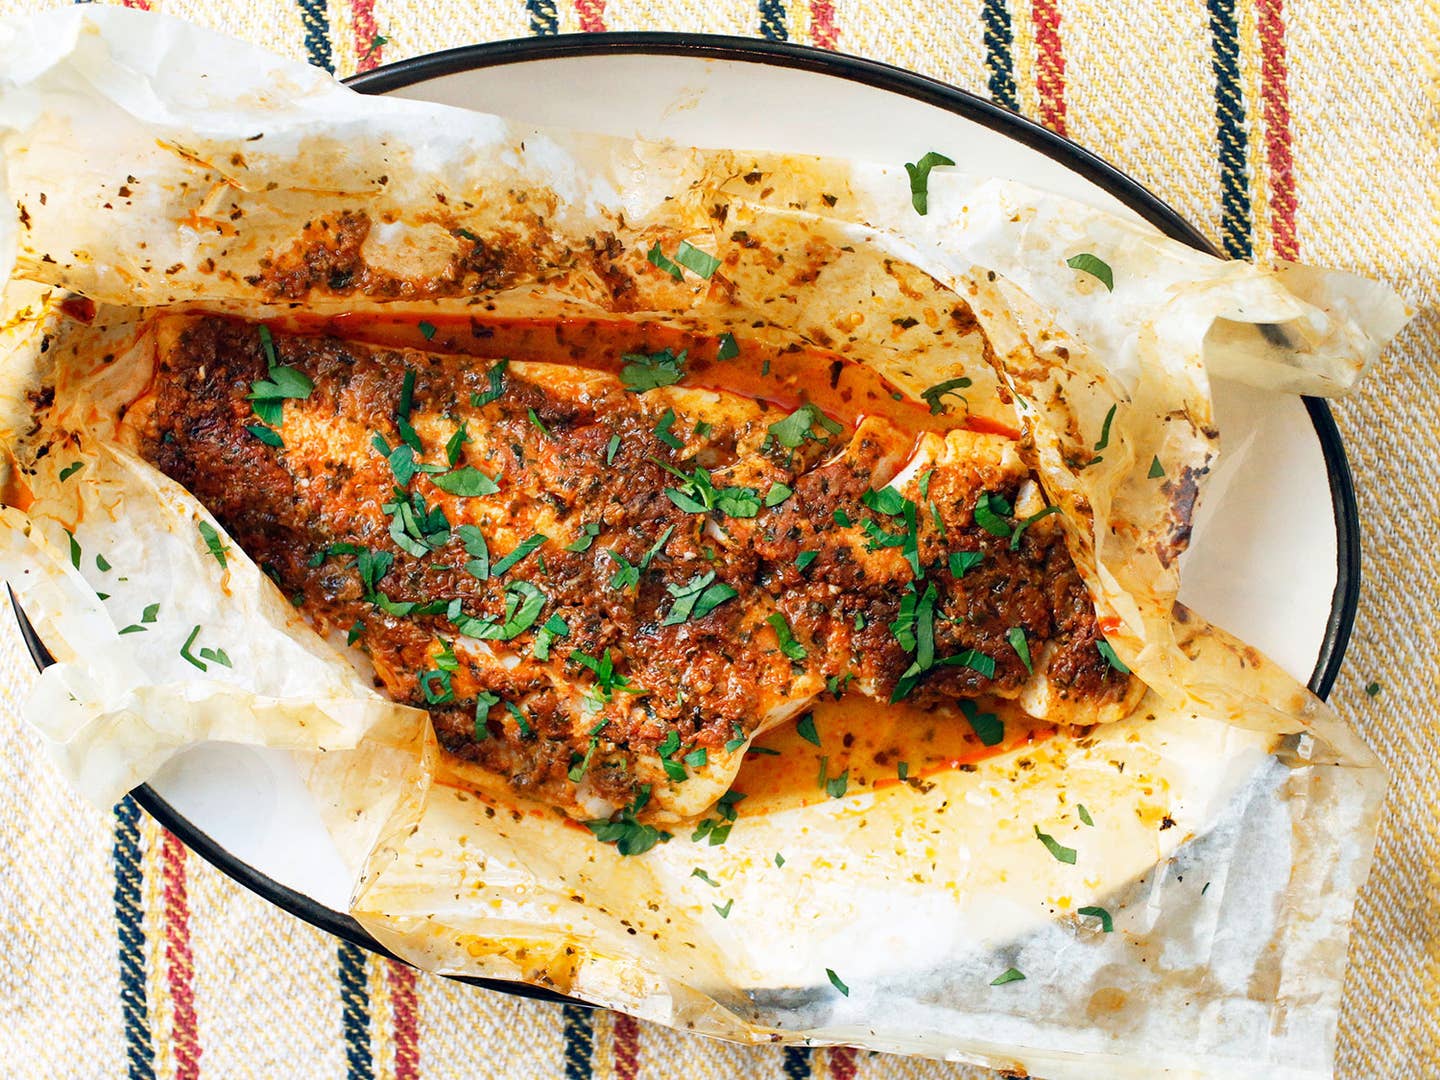 Parchment-Baked Fish with North African Chermoula Sauce